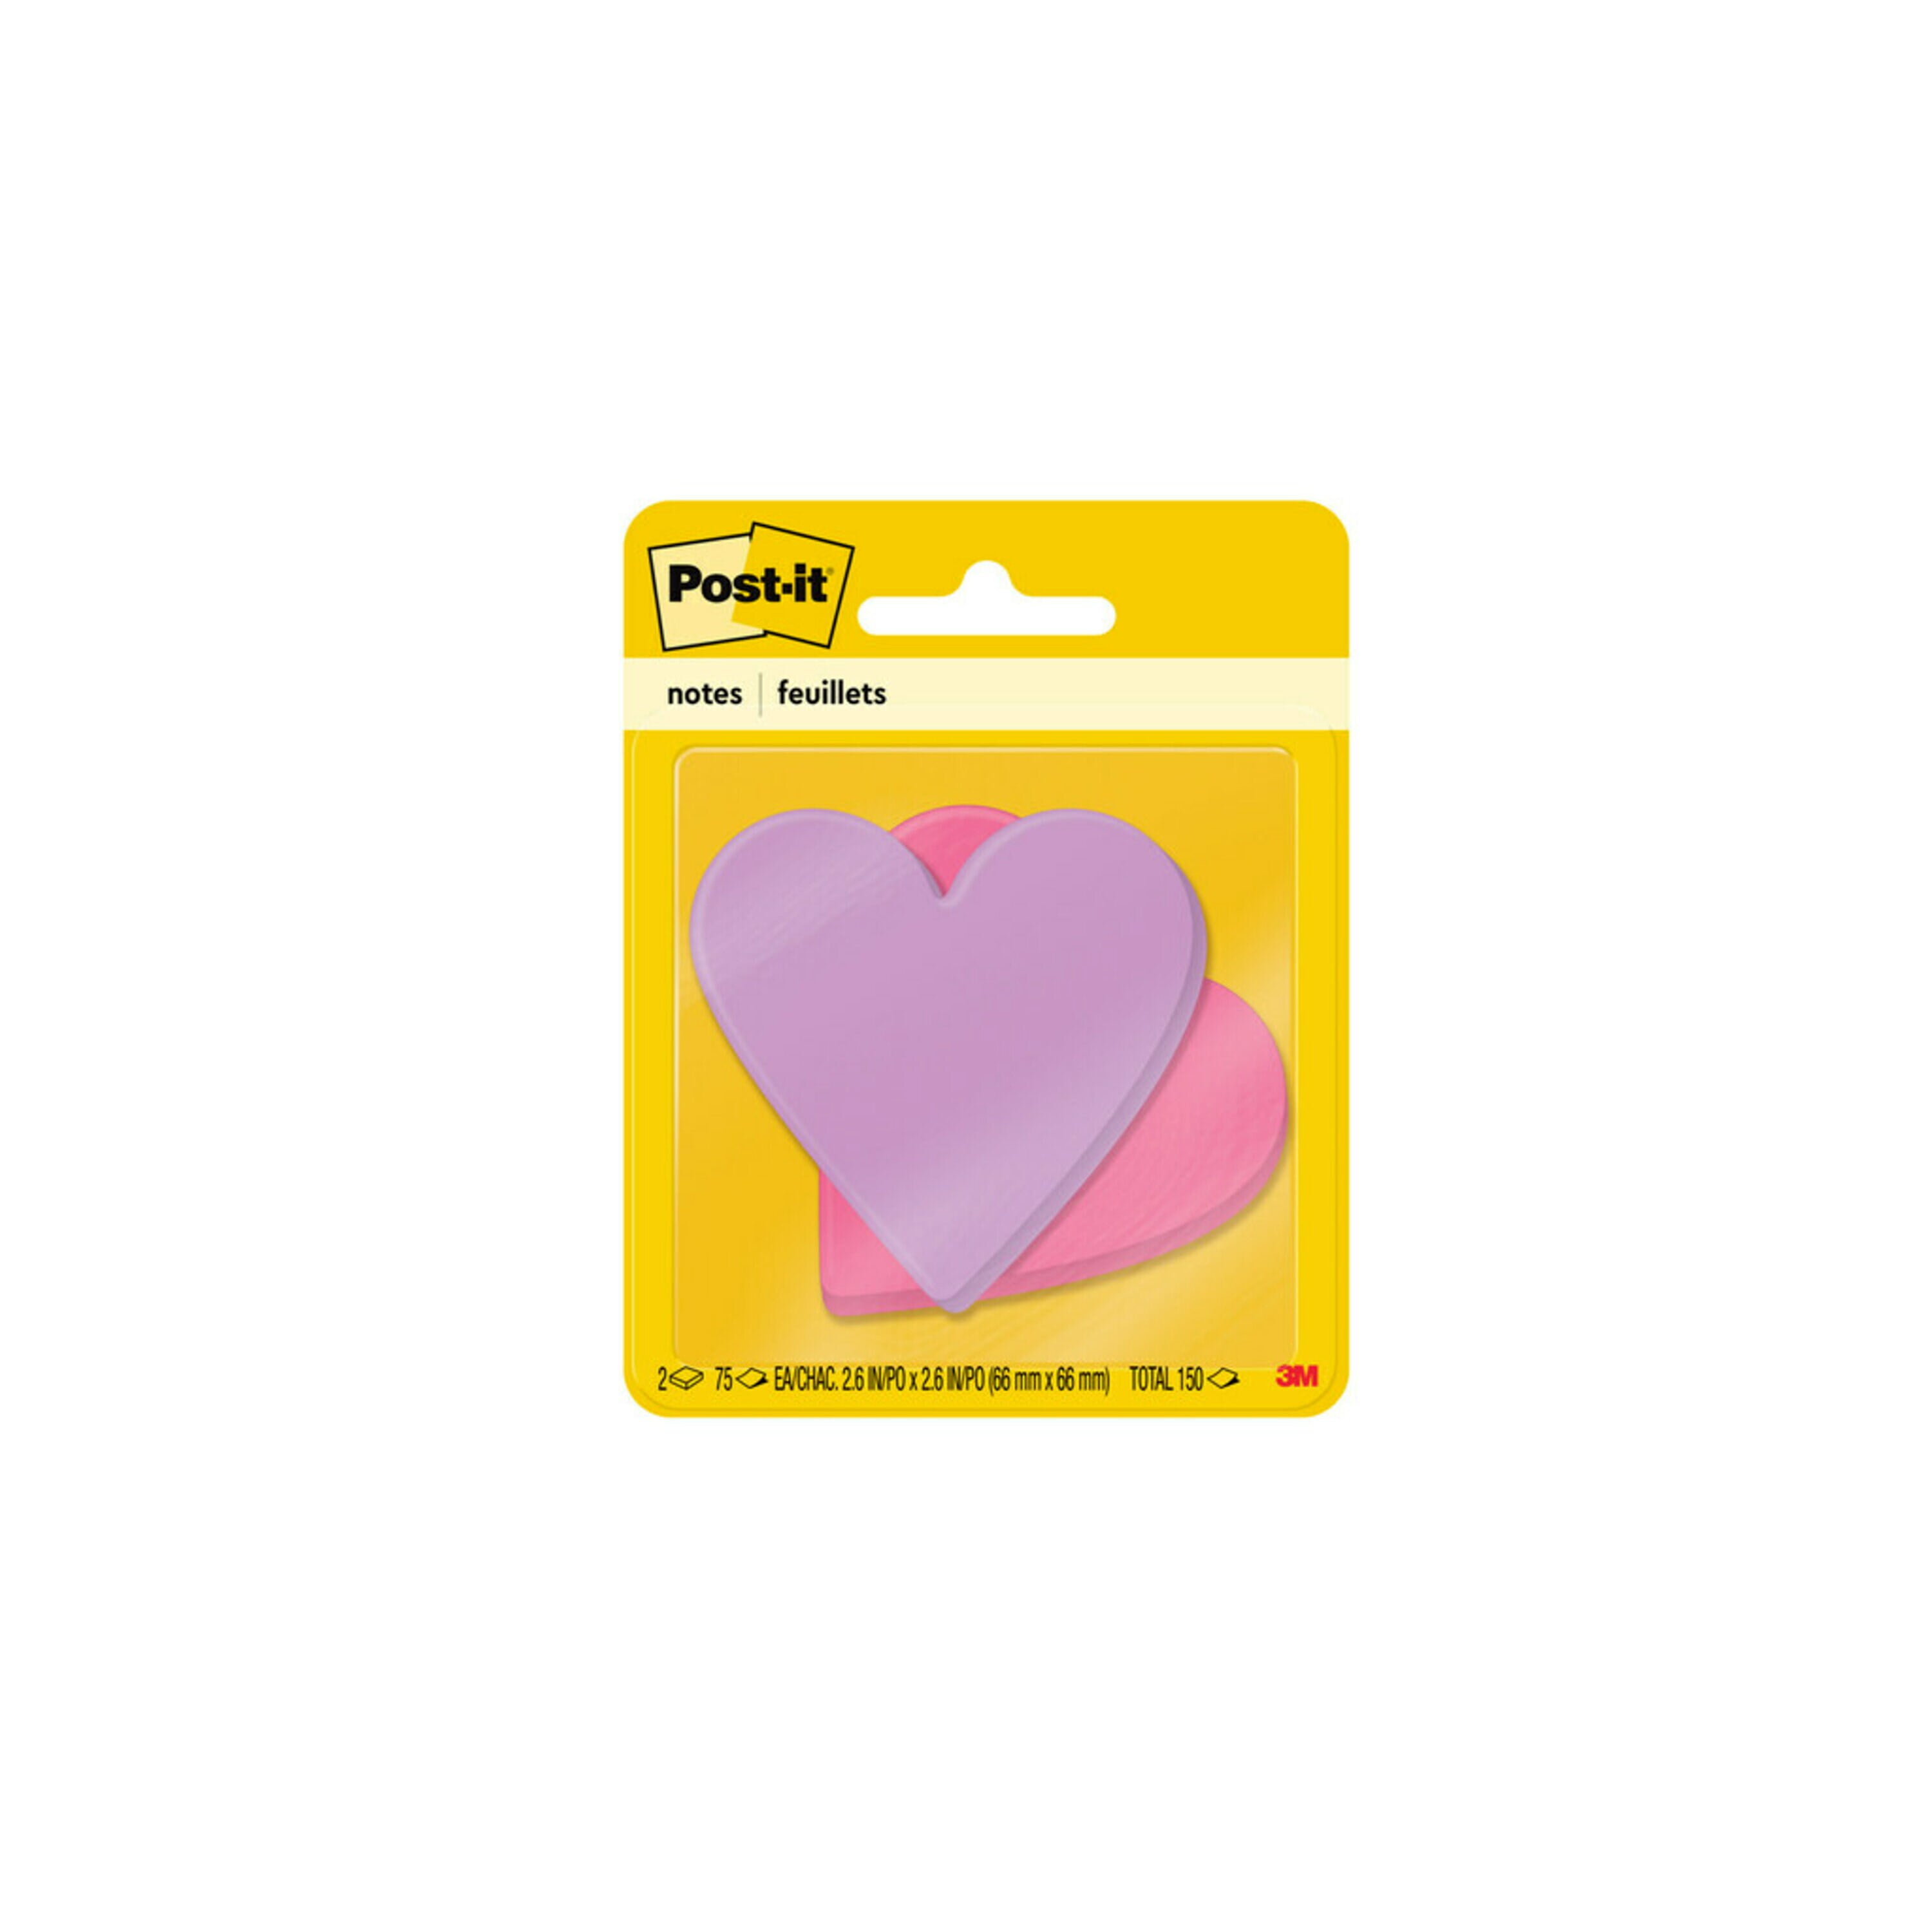 POST-IT HEART WITH POST-IT POP UP NOTE DISPENSER  SHOW OFF YOUR STYLE RED